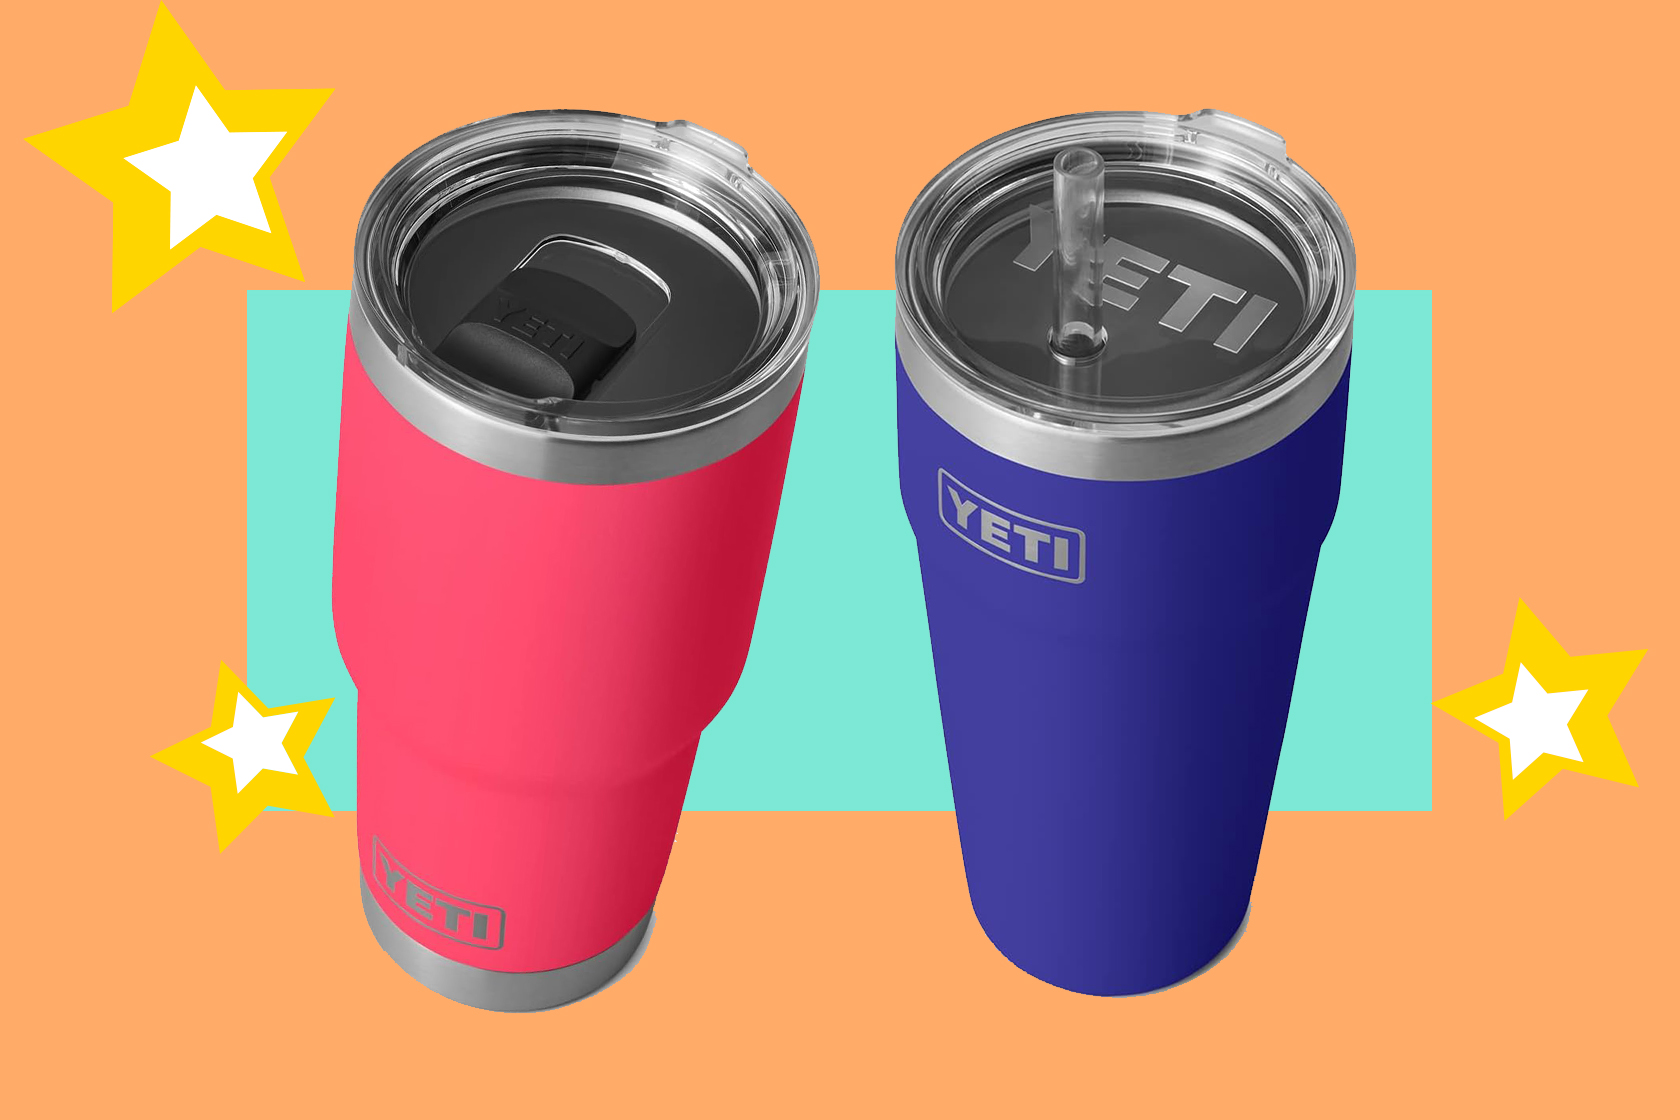 Save on YETI's mugs and ramblers for Cyber Monday